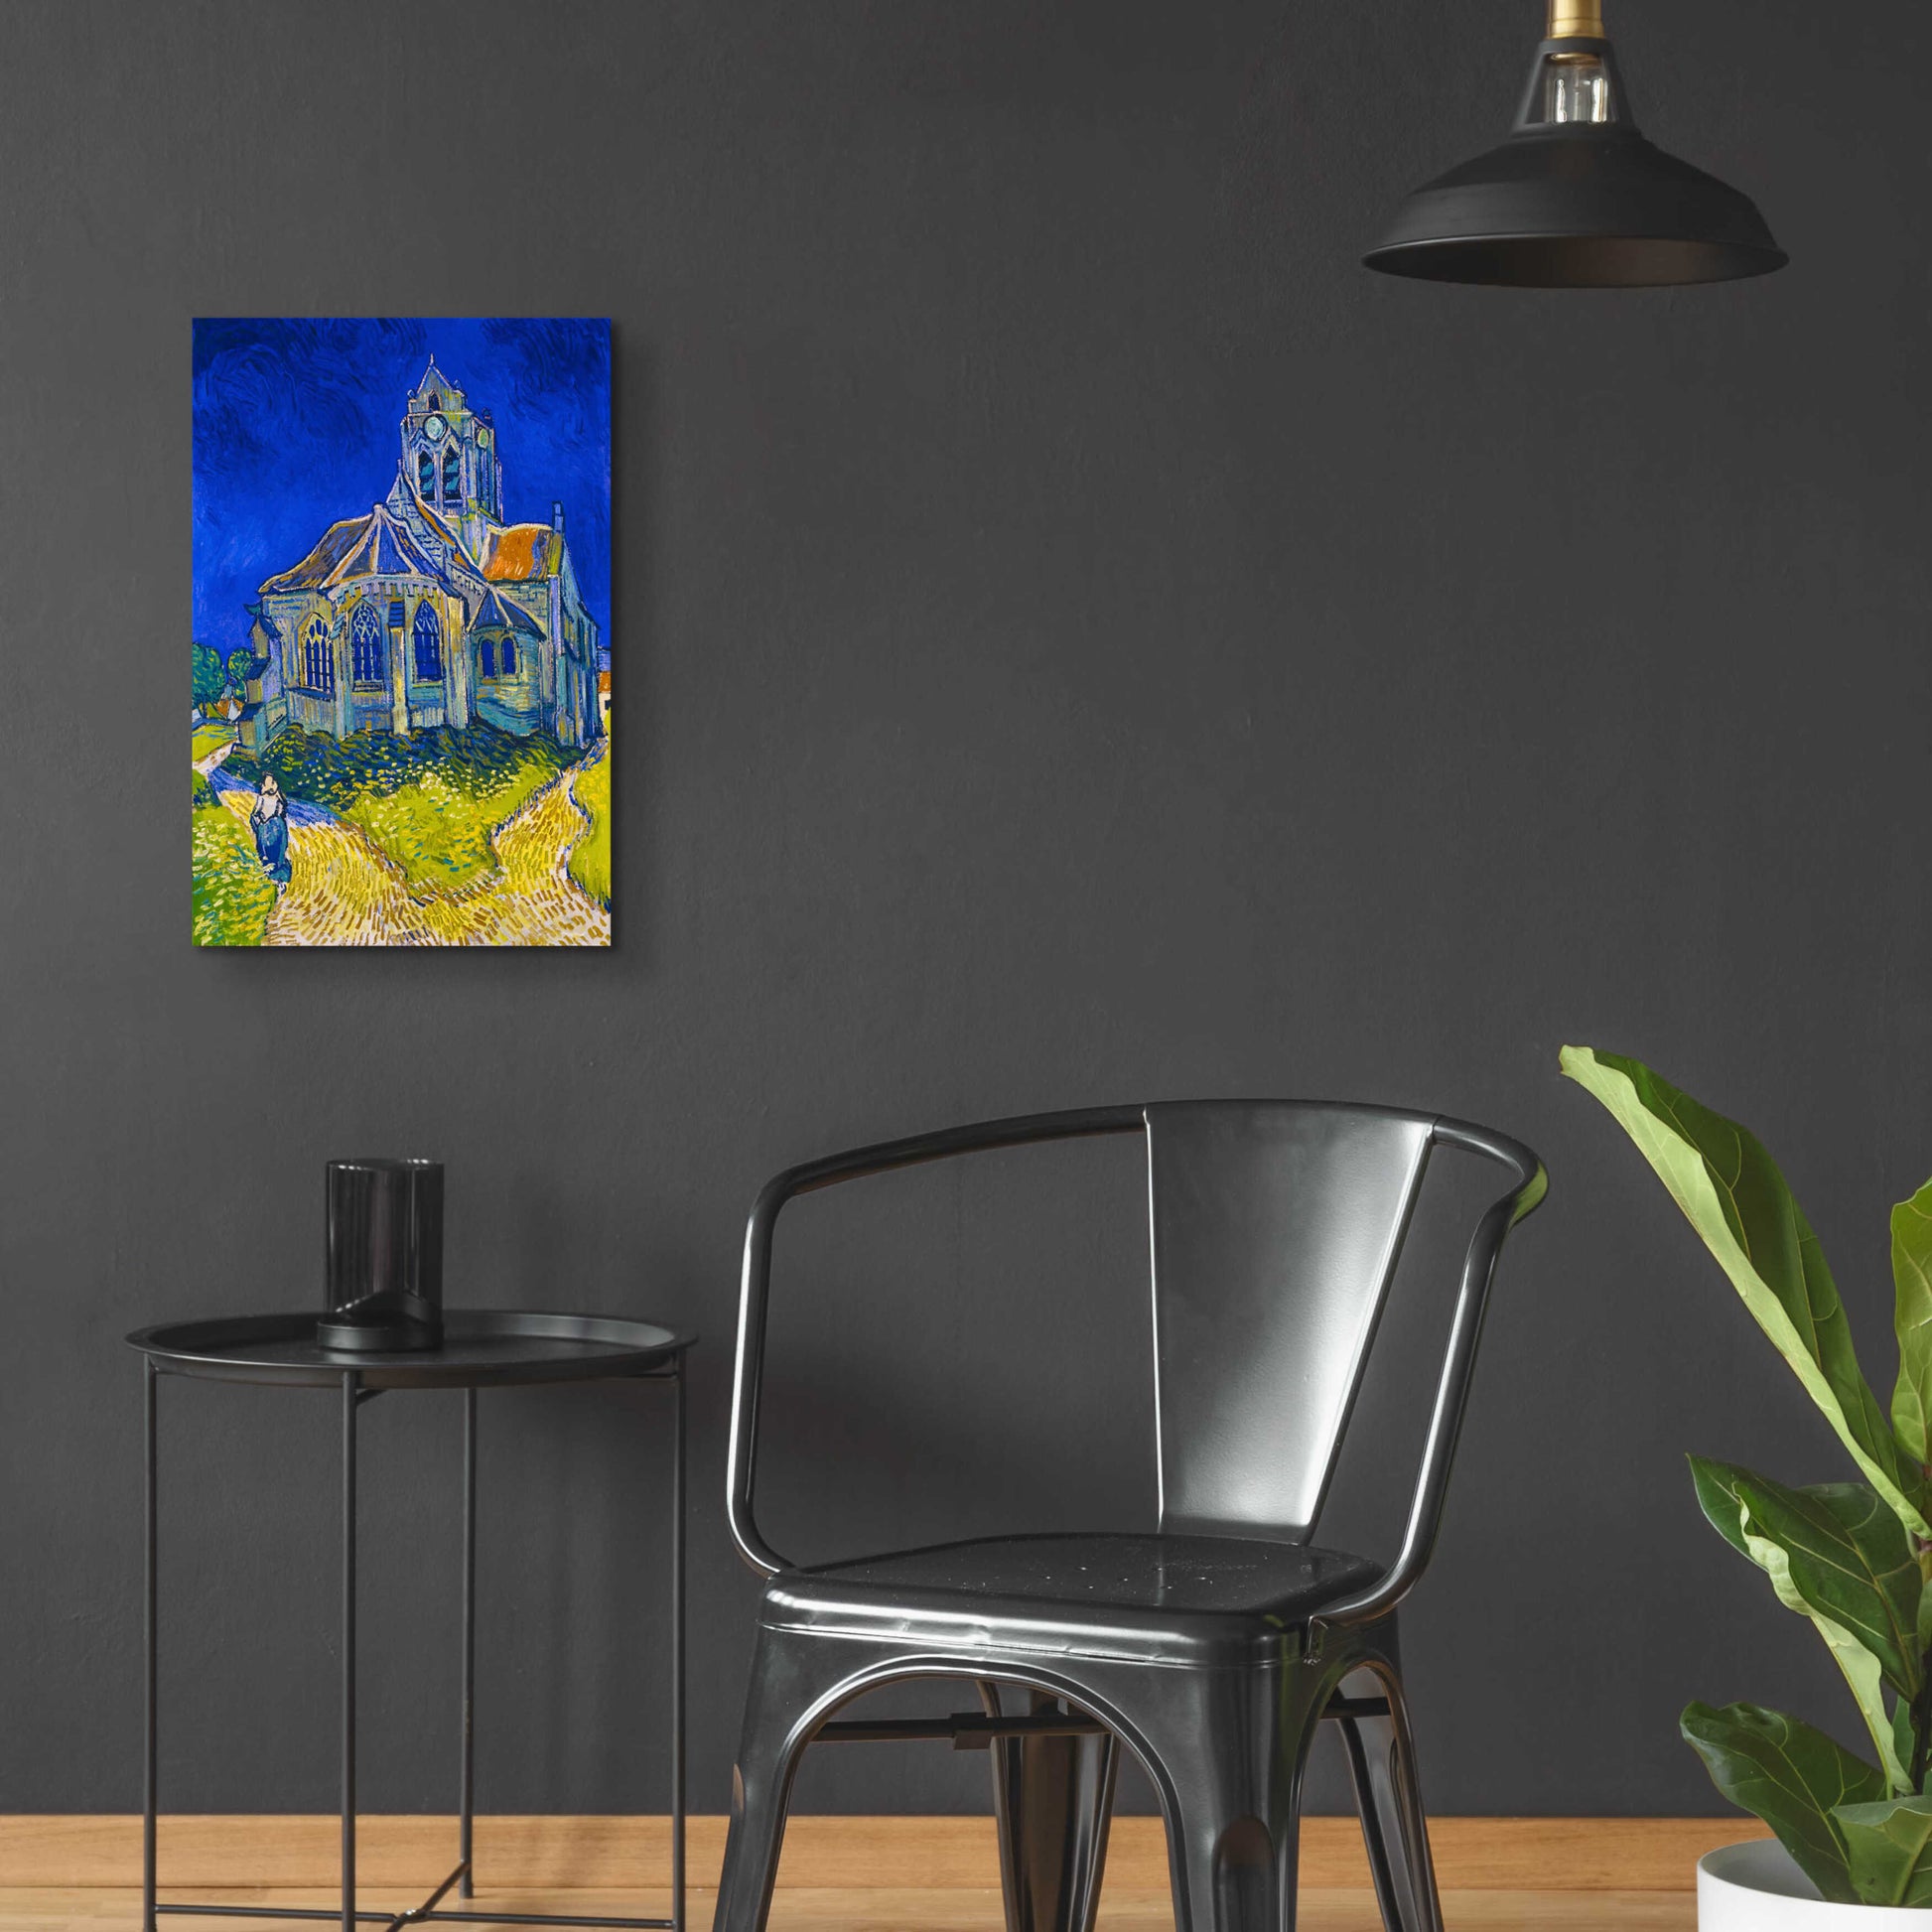 Epic Art 'The Church In Auvers-Sur-Oise, View From The Chevet' by Vincent Van Gogh, Acrylic Glass Wall Art,16x24